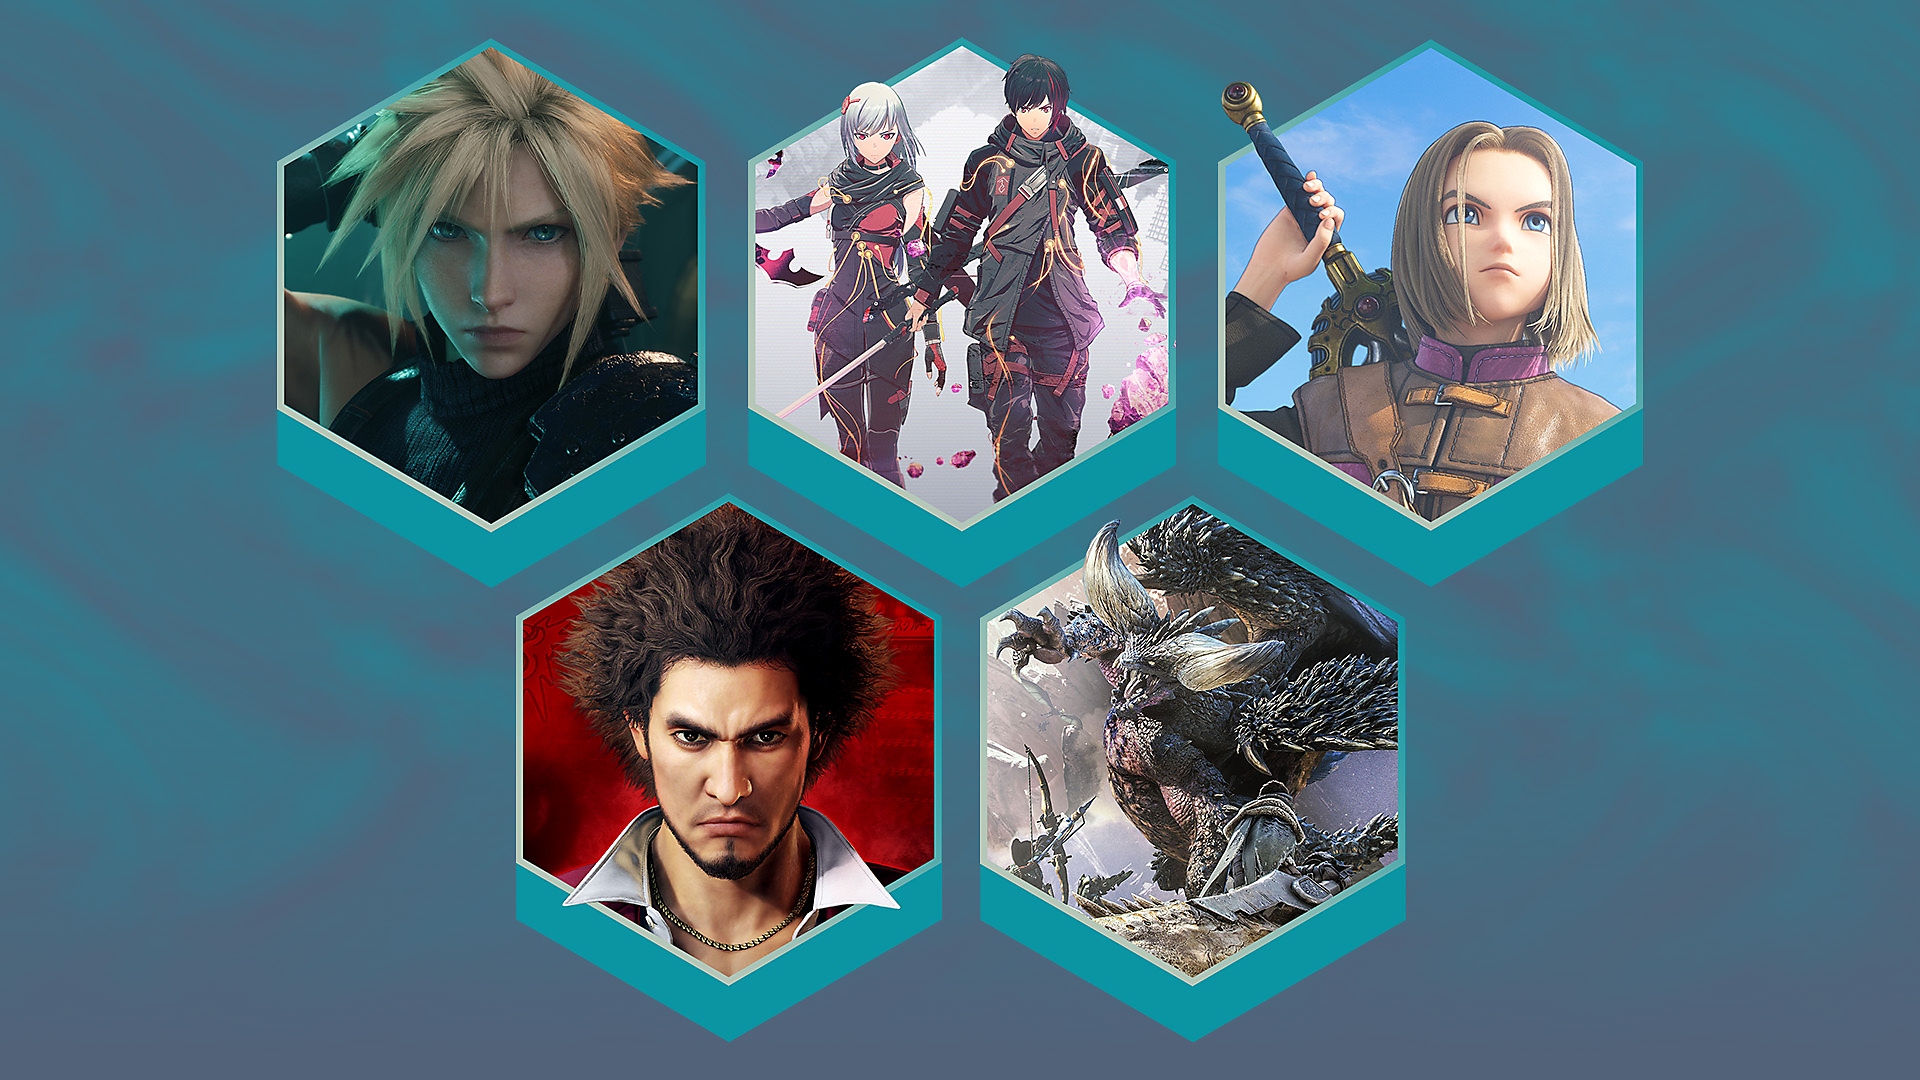 Best JRPG games on PS4 and PS5 promotional art featuring Final Fantasy VII Remake, Scarlet Nexus, Dragon Quest Heroes XI: Echoes of an Elusive Age, Yakuza: Like a Dragon and Monster Hunter: World.